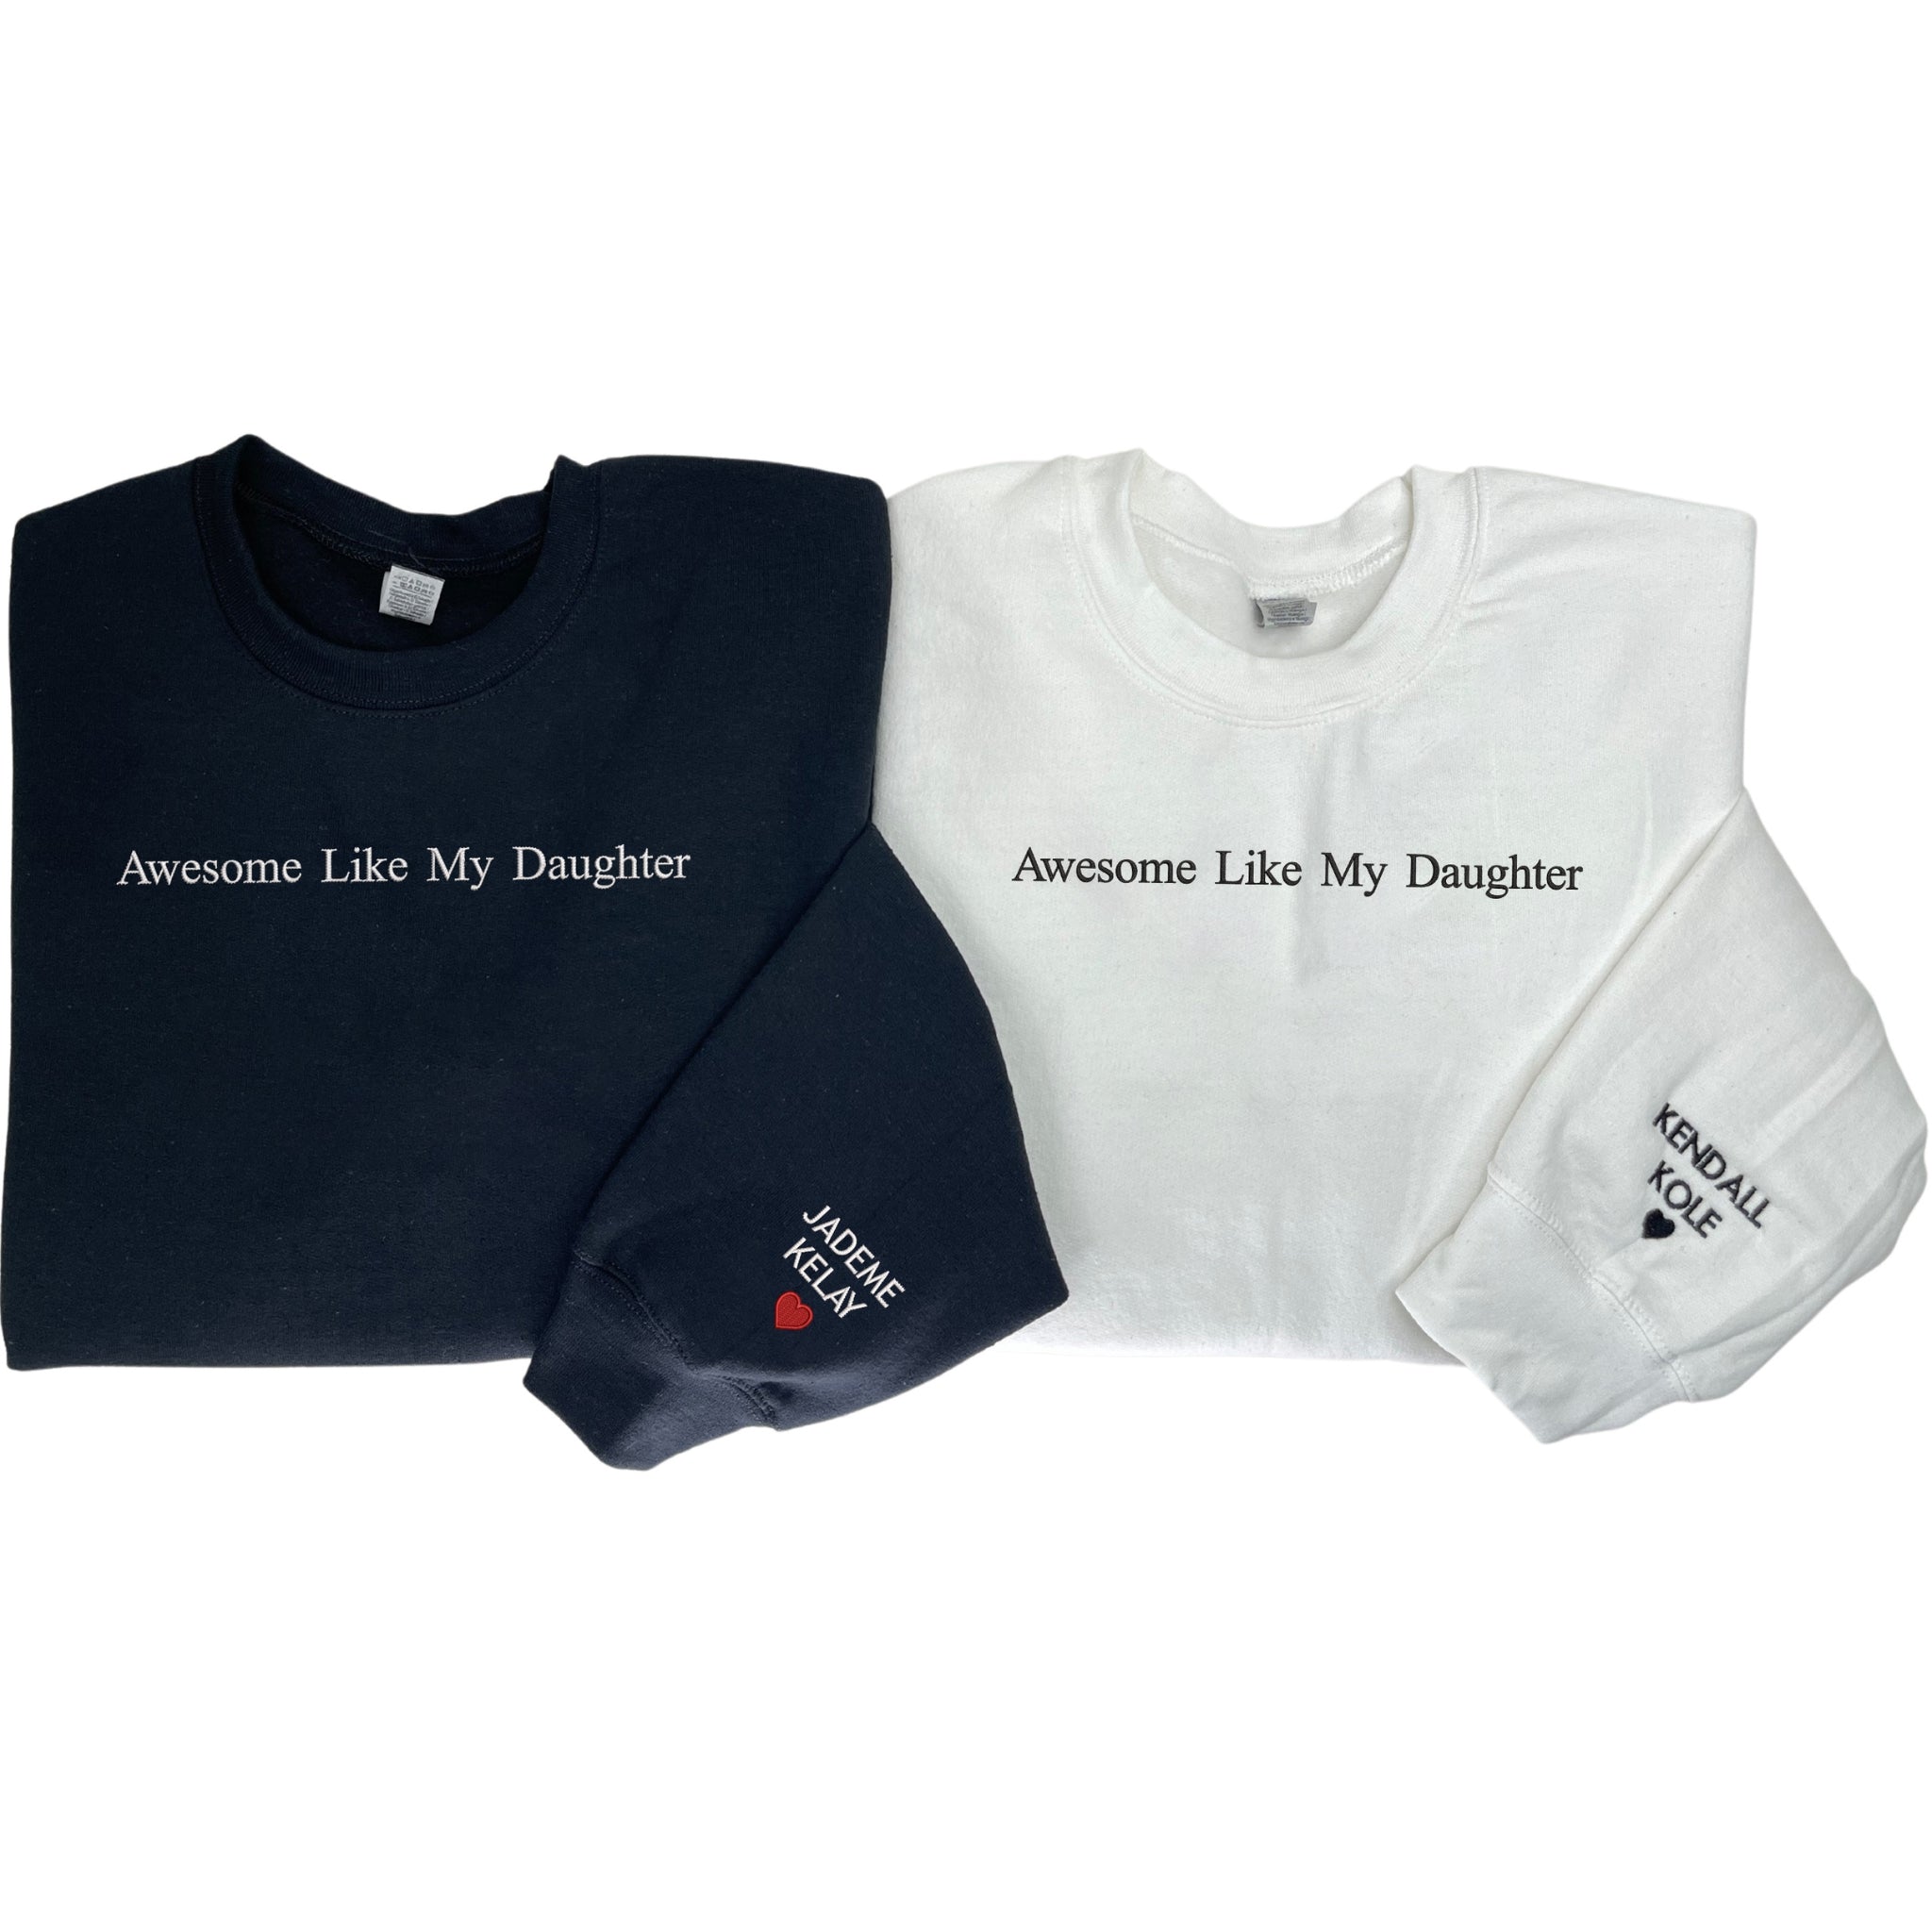 Awesome Like My Daughter Sweatshirt Embroidered